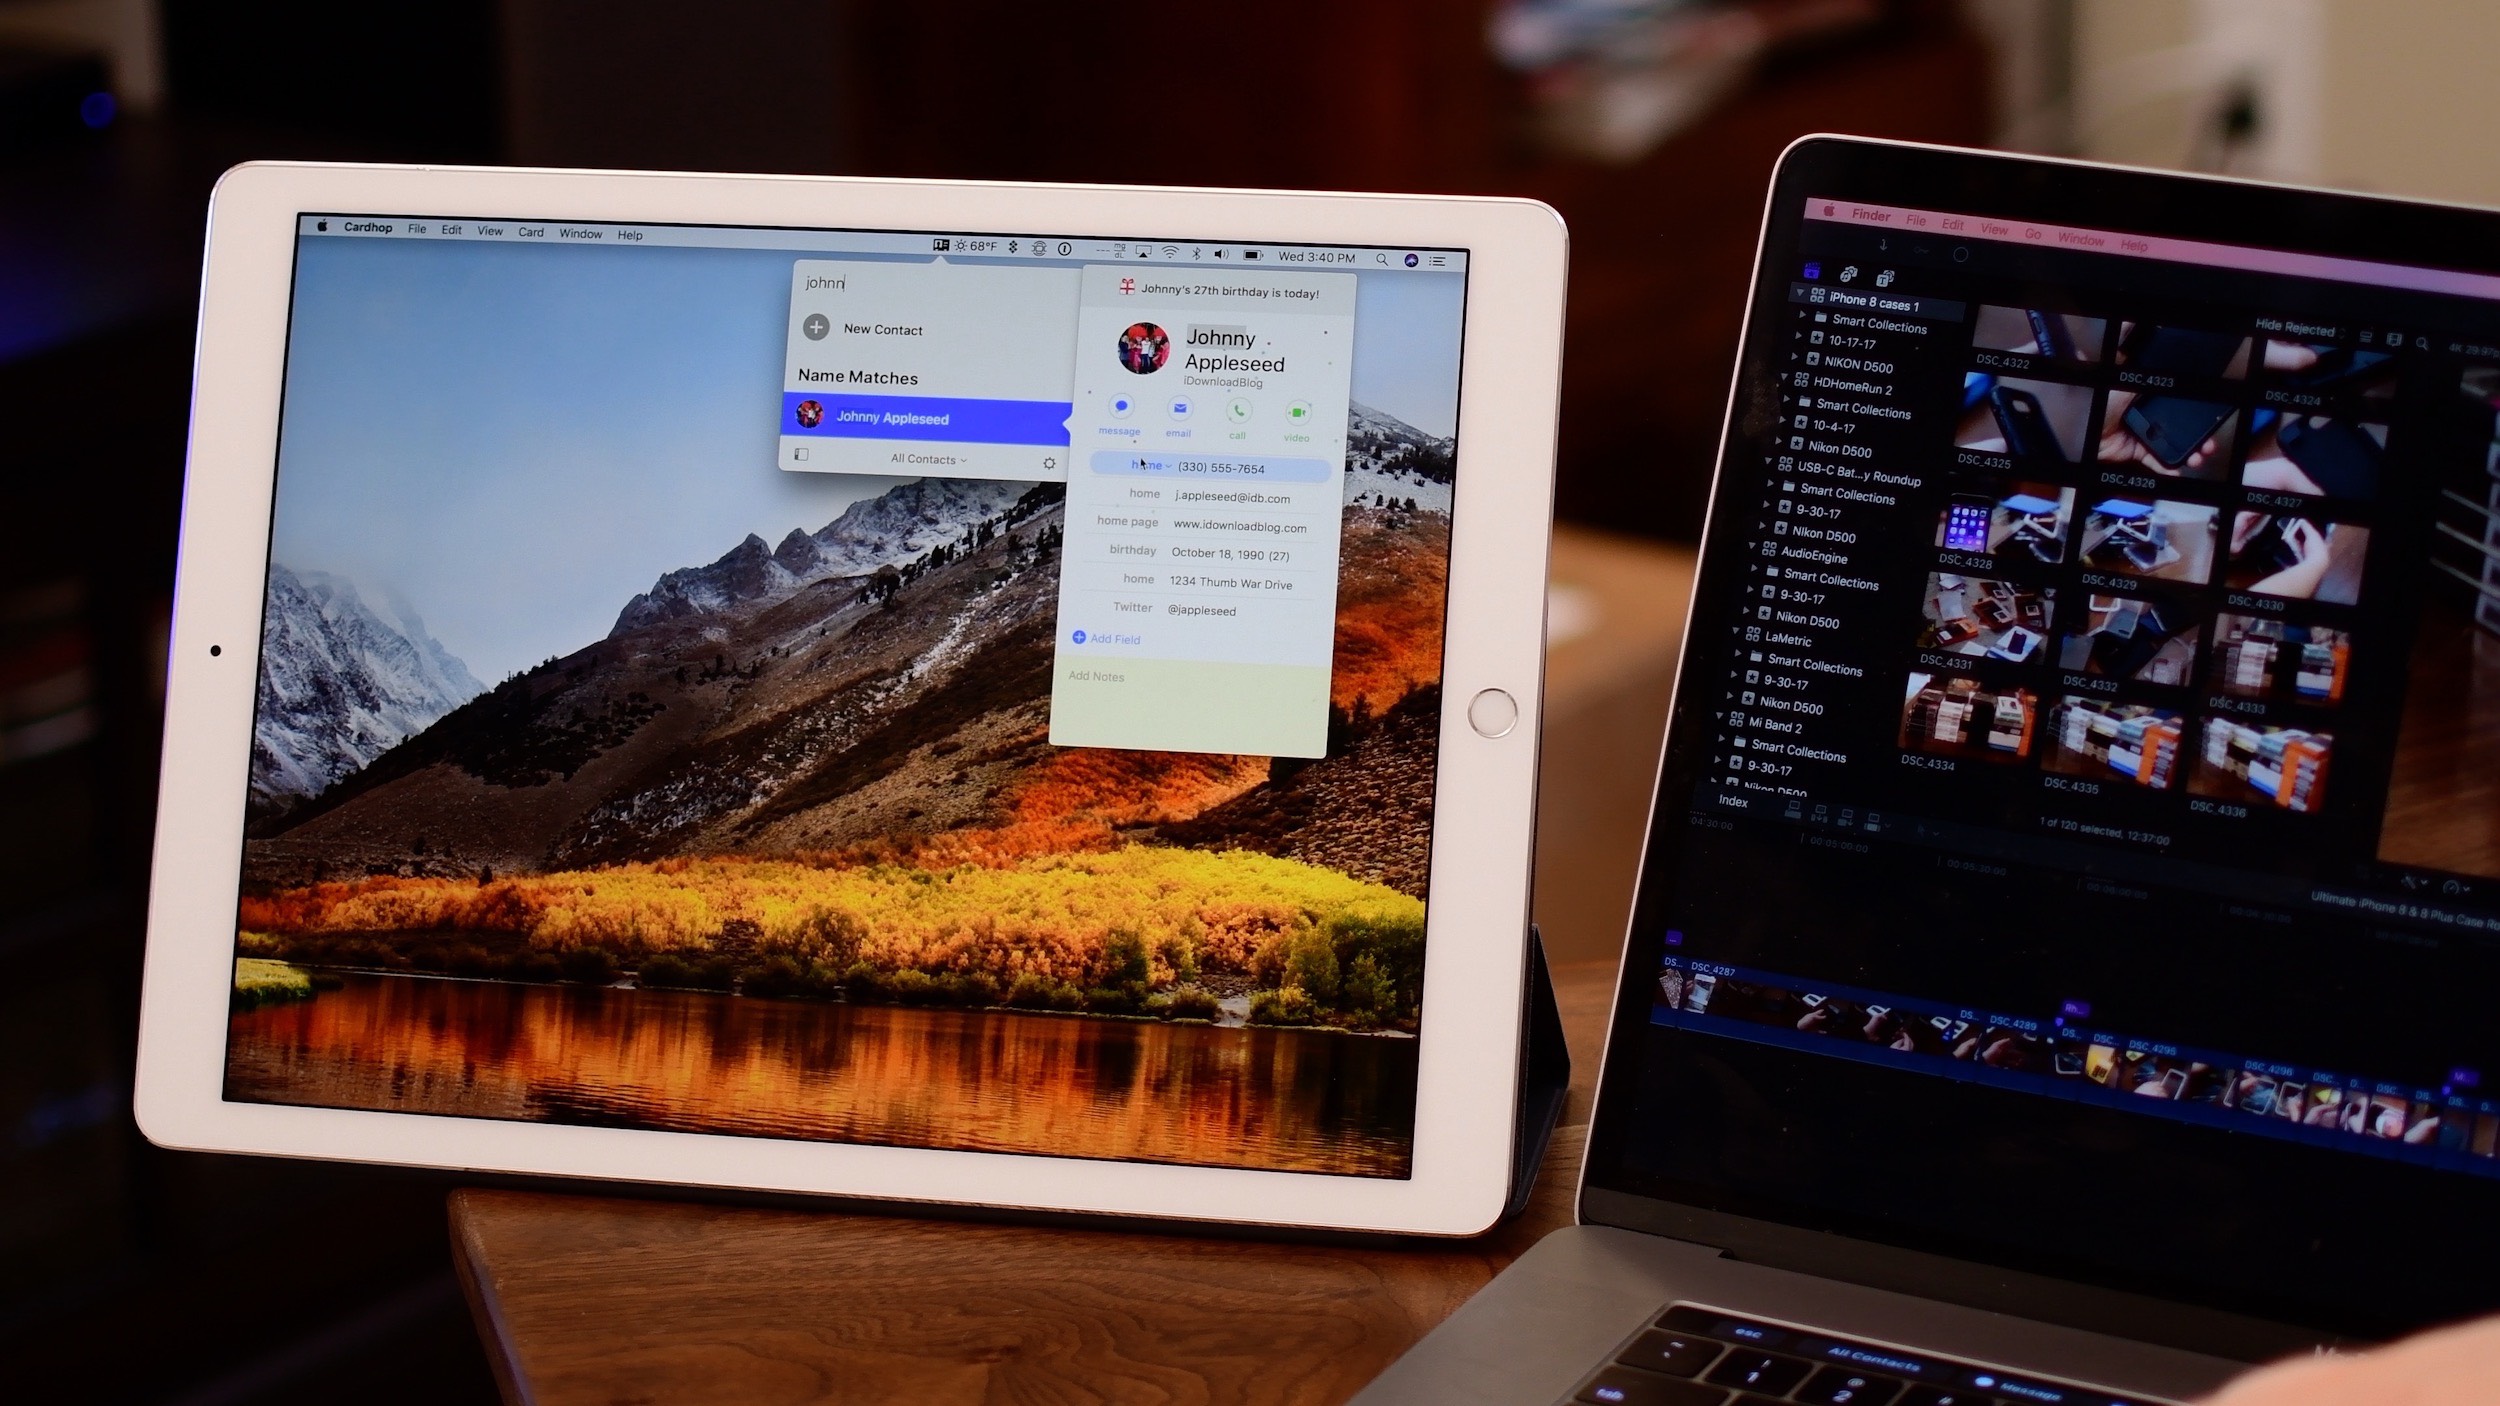 Luna Display is a lag-free way to use your iPad as a second monitor